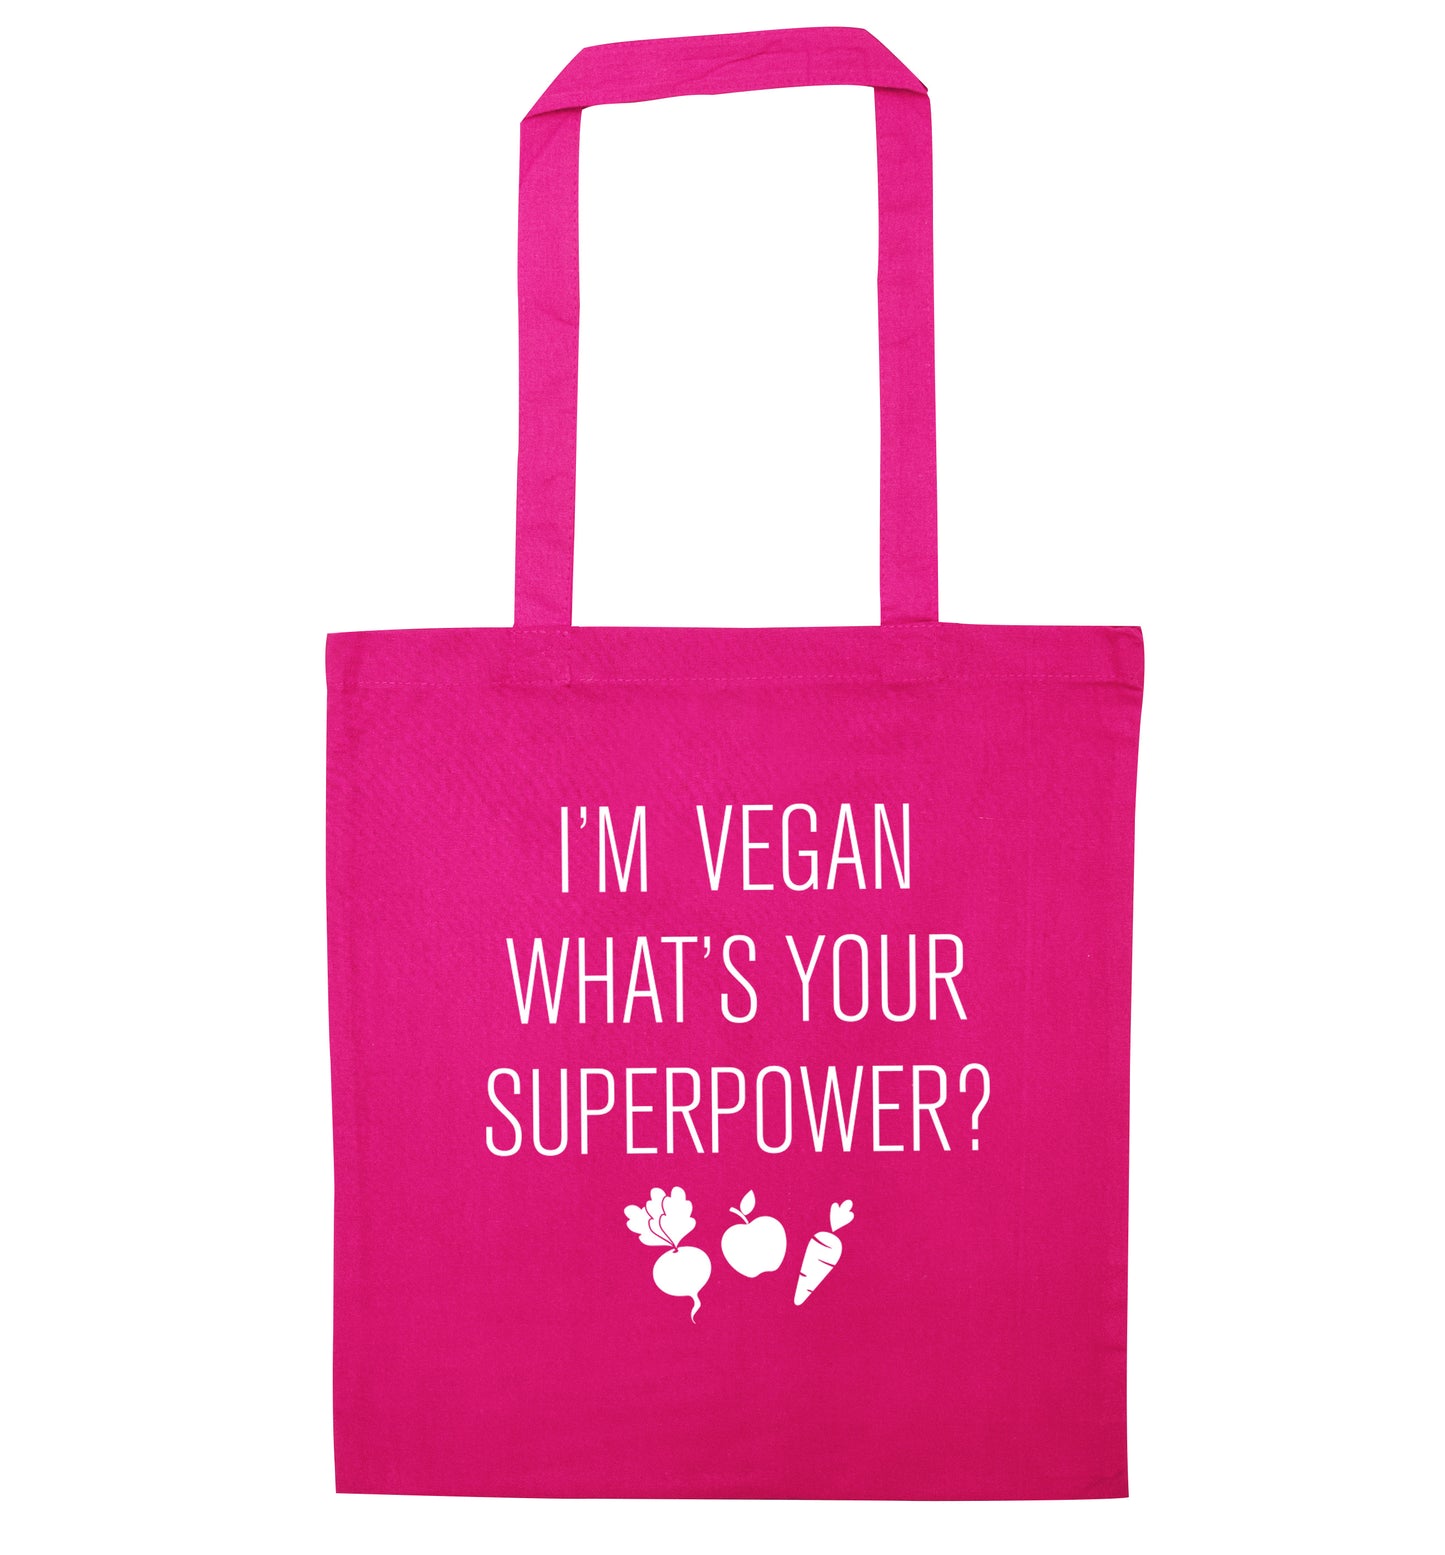 I'm Vegan What's Your Superpower? pink tote bag